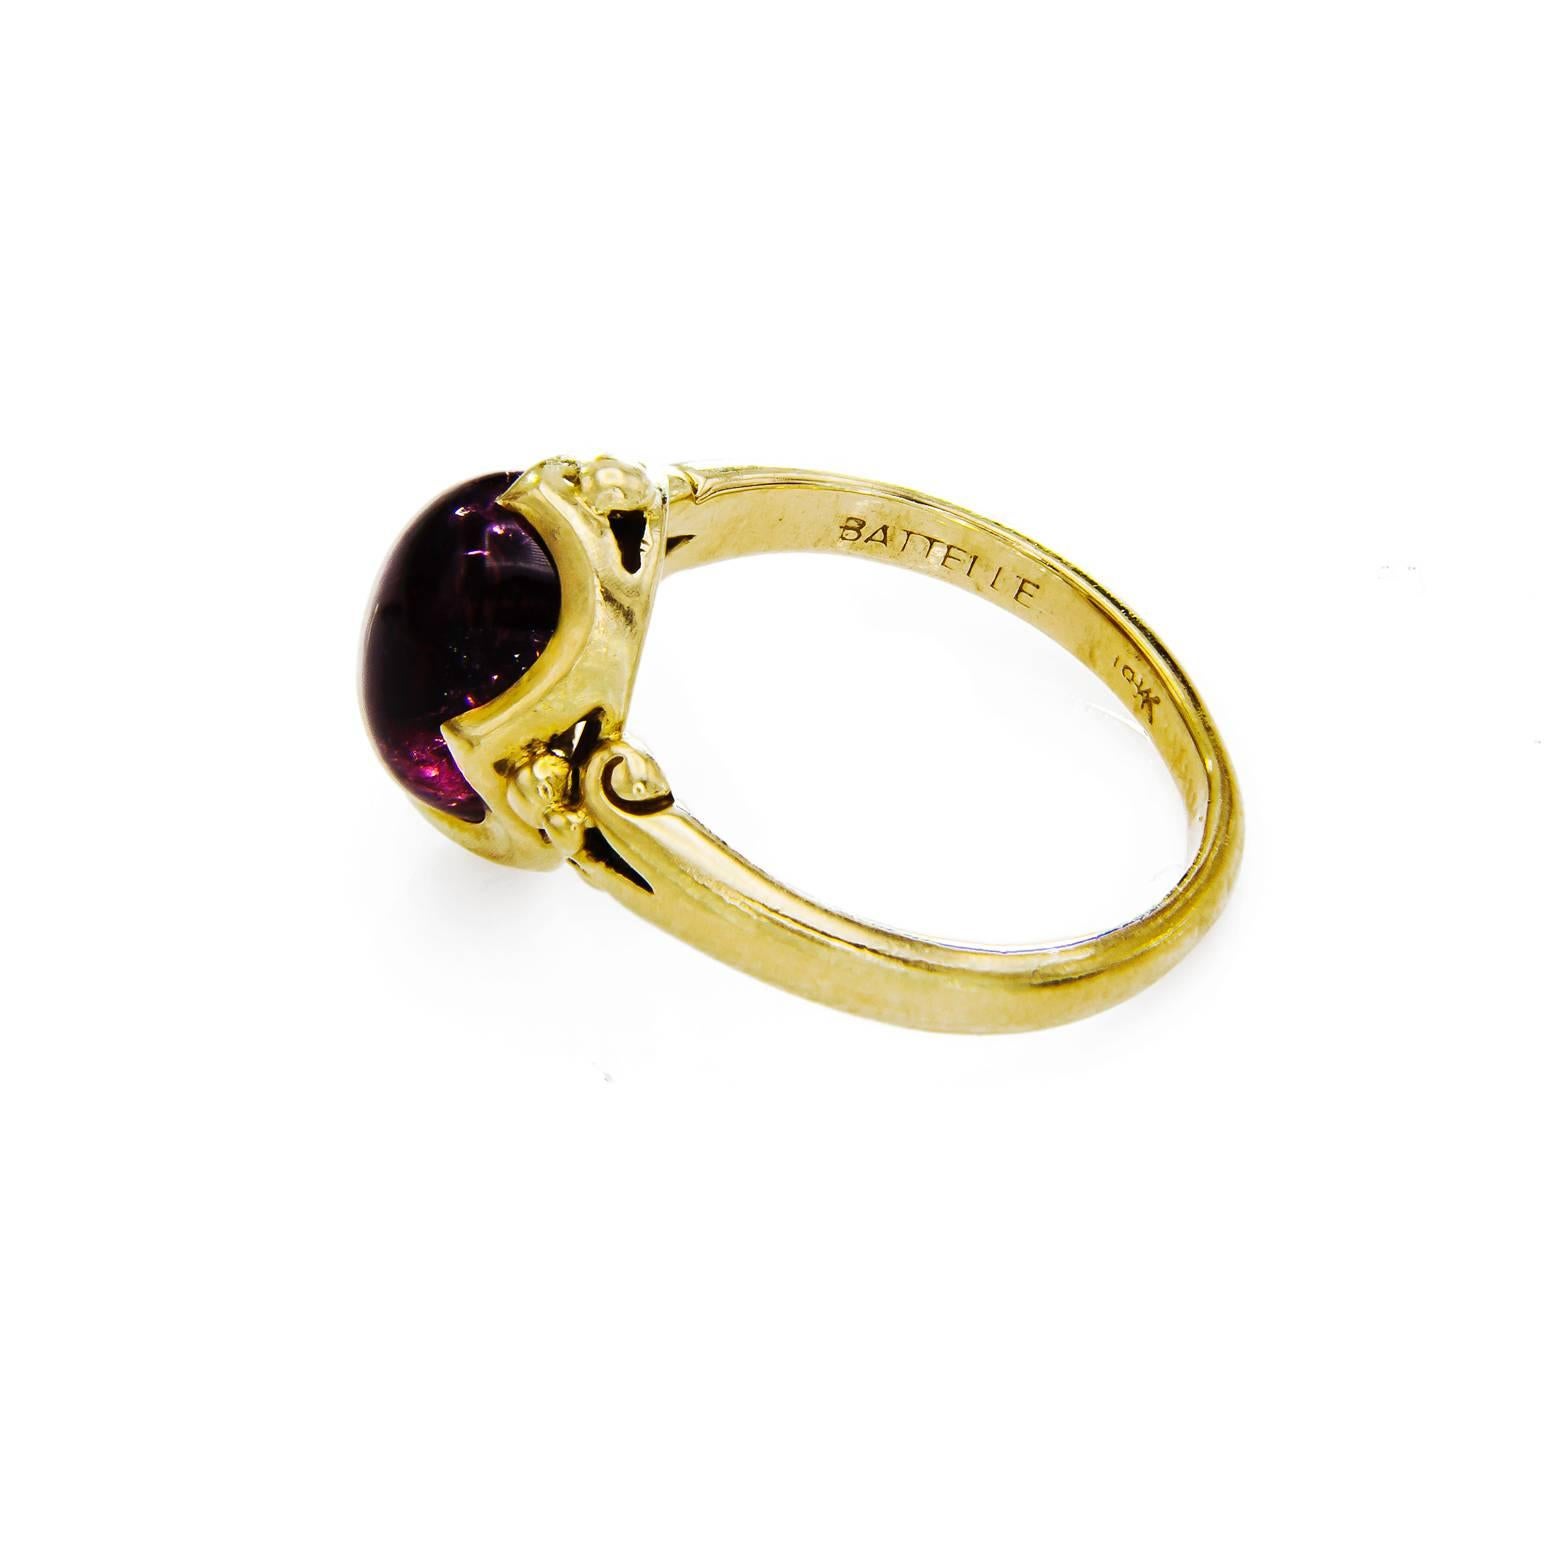 This ring is beautifully carved with a delicate sweeping design that cradles the tourmaline cabachon. The color of the stone is a deep claret red and the 18k yellow gold is a perfect compliment. The ring is a size 6 3/4. 